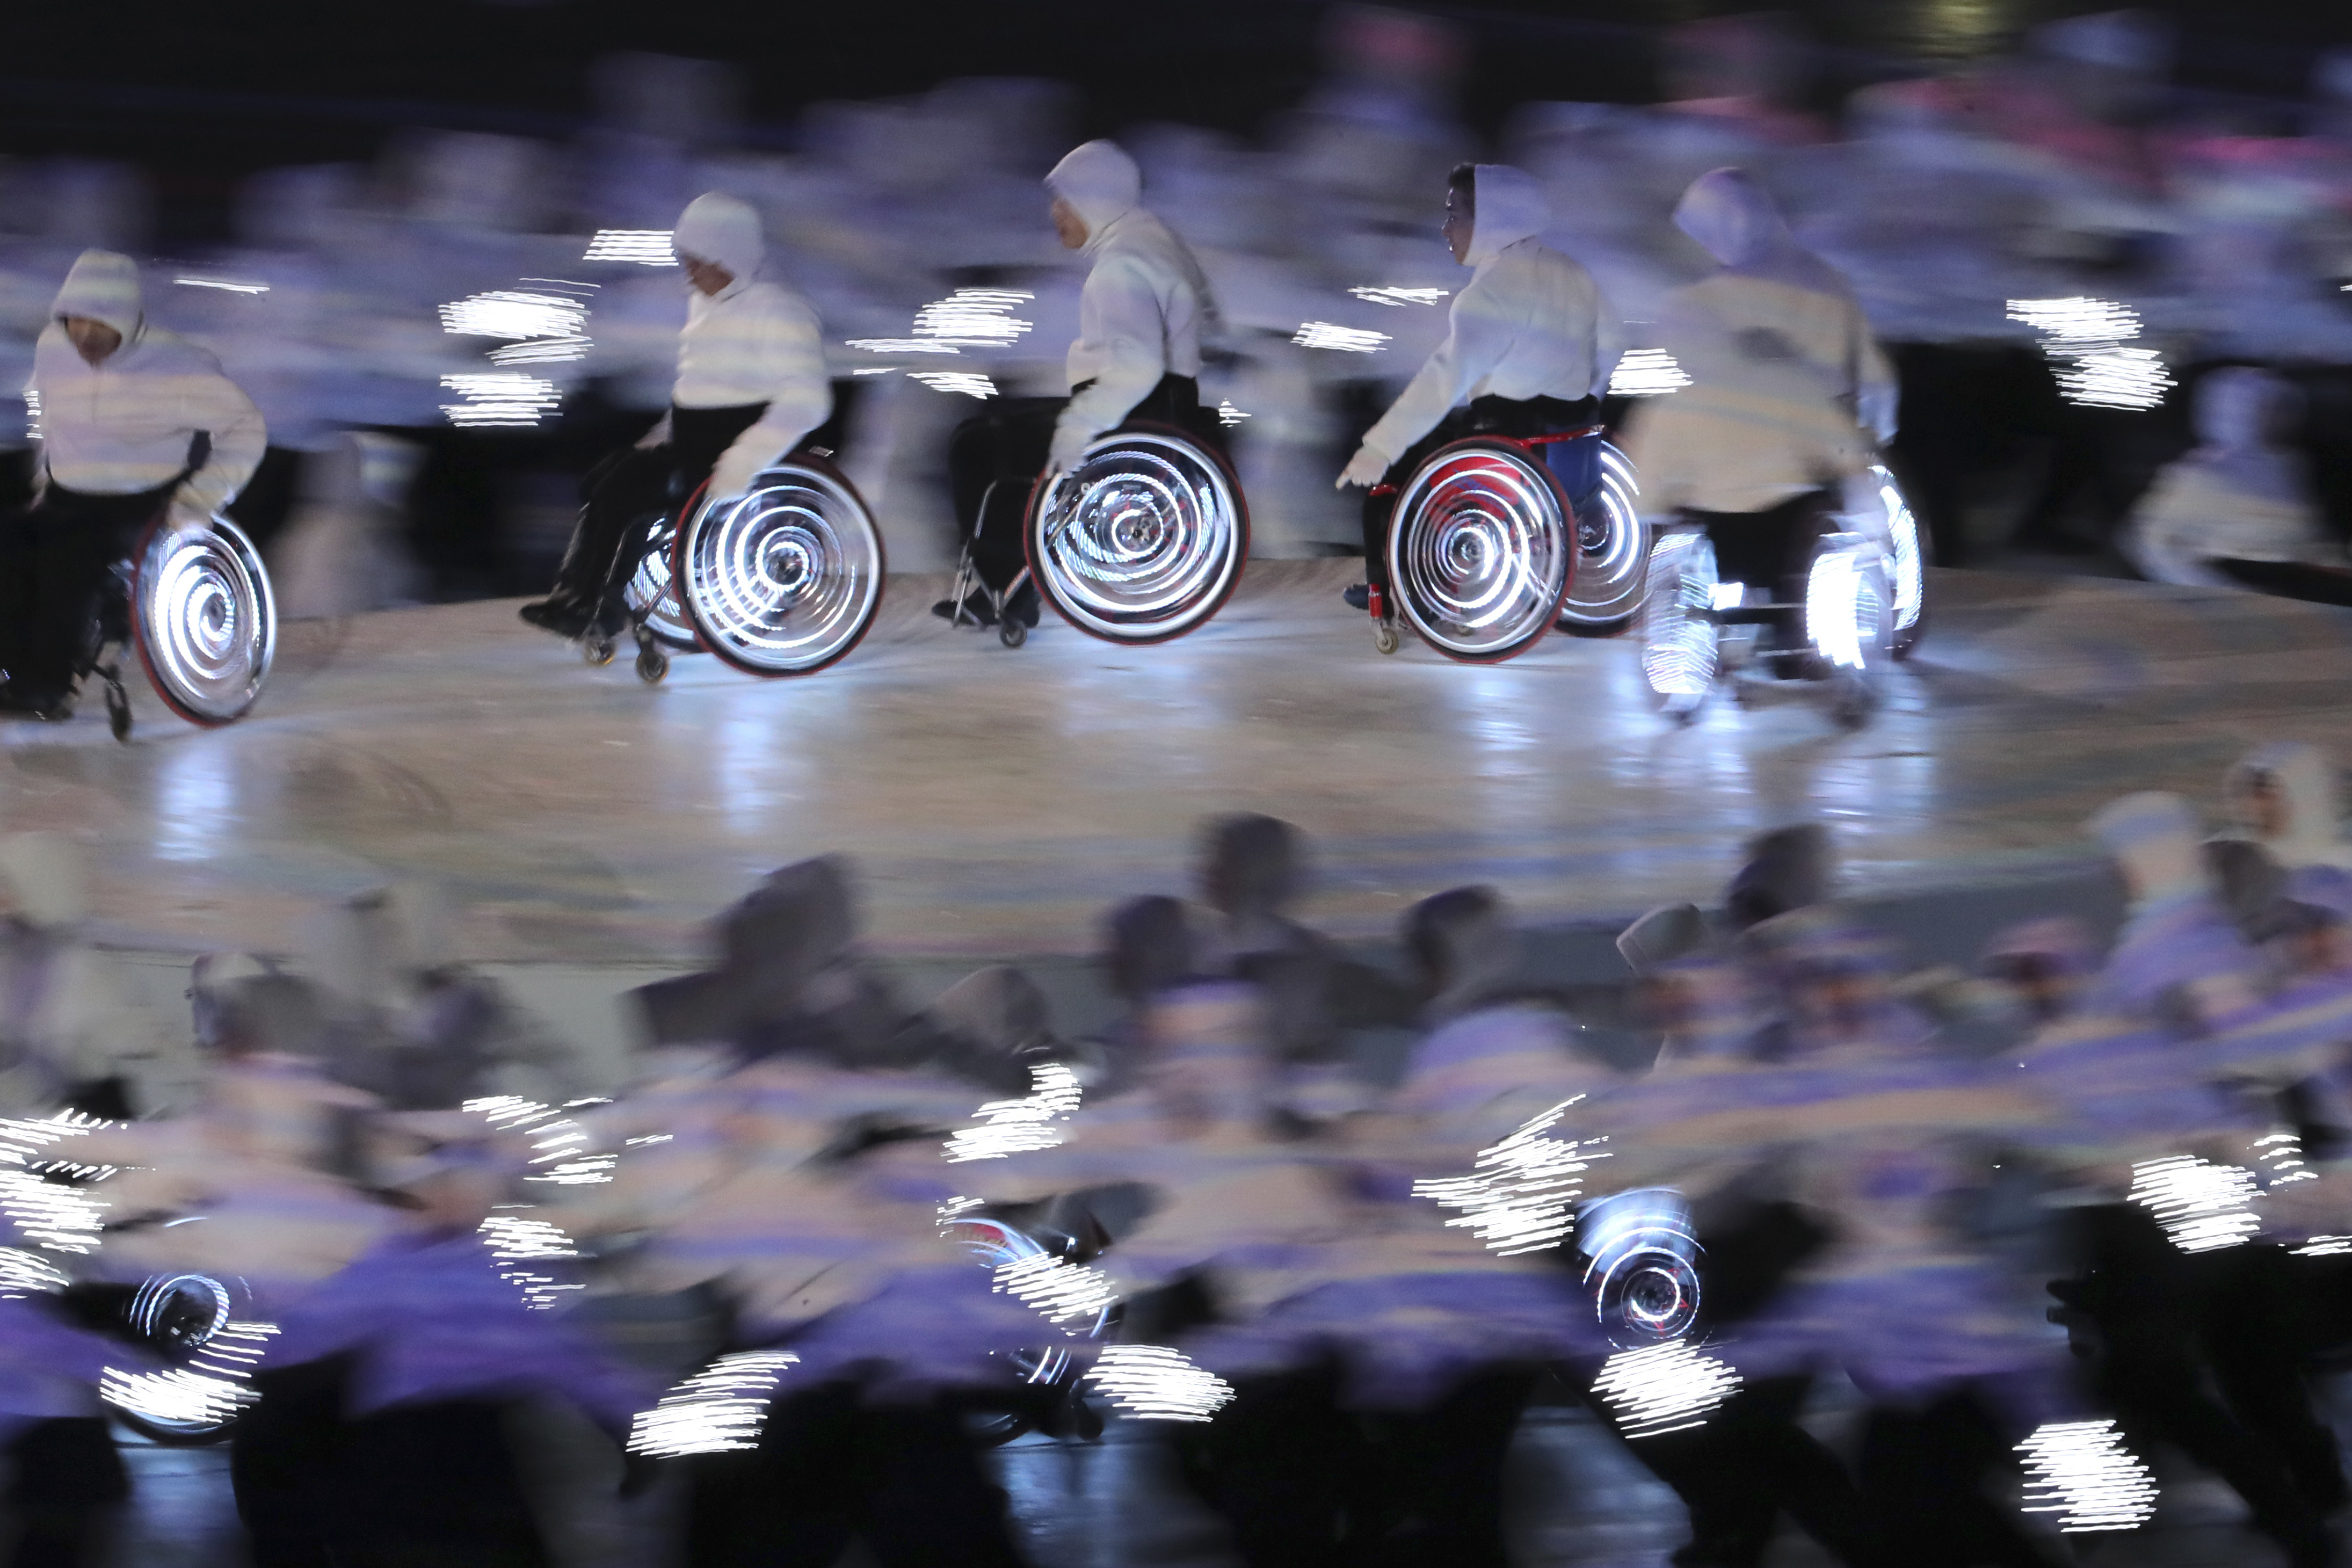 Performers take part in the opening ceremony of the 2018 Winter Paralympics in Pyeongchang, South Korea, Friday, March 9, 2018. (AP Photo/Ng Han Guan)